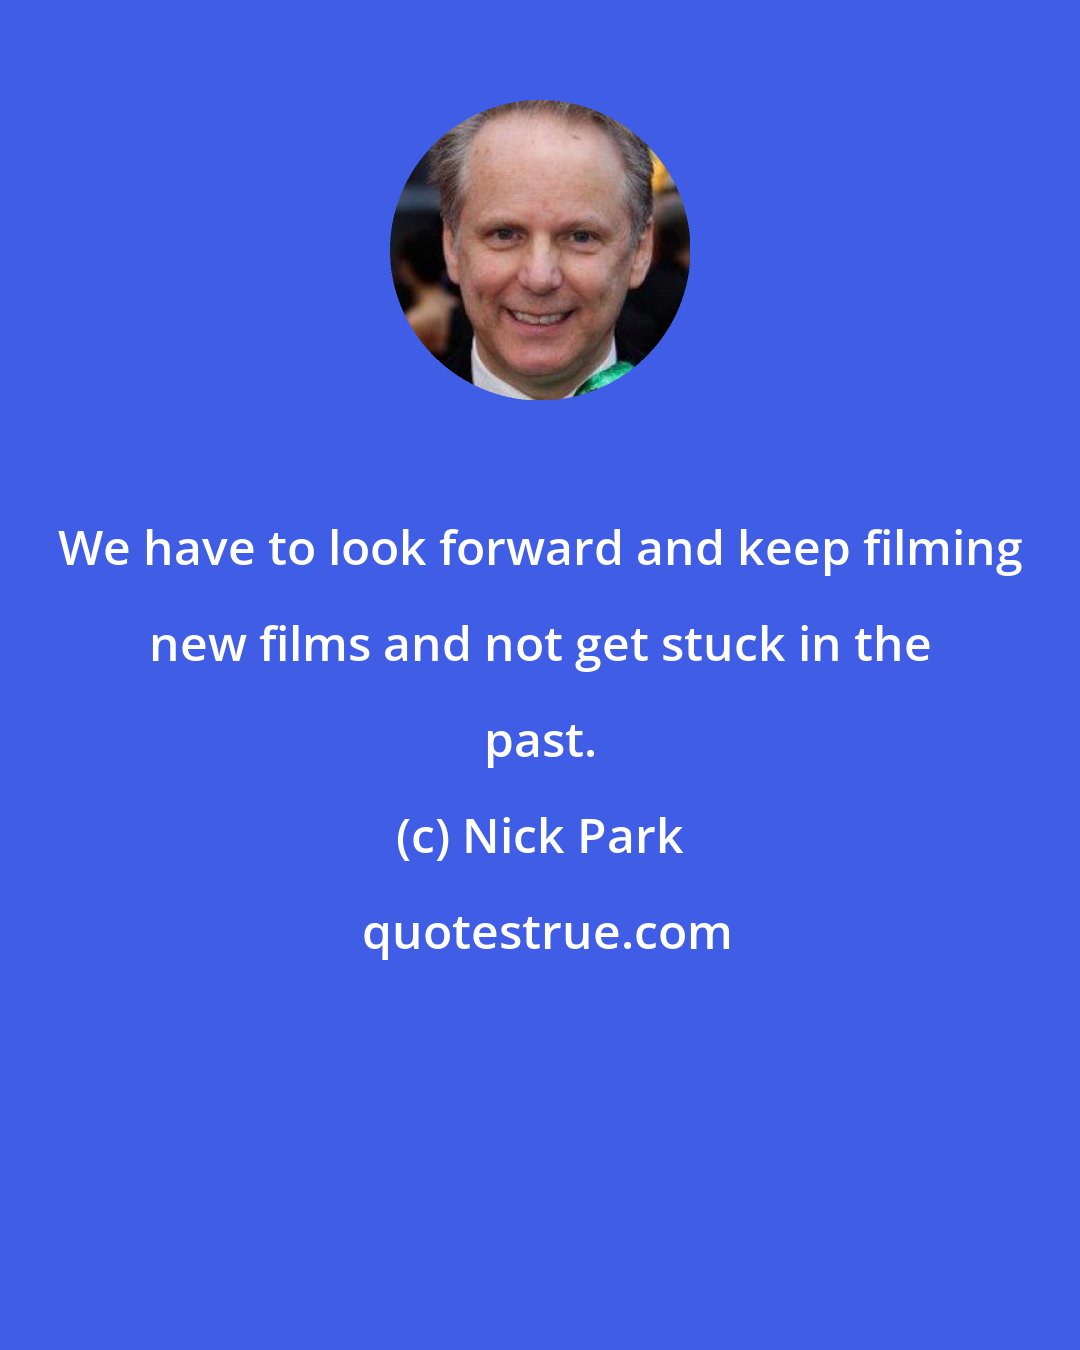 Nick Park: We have to look forward and keep filming new films and not get stuck in the past.